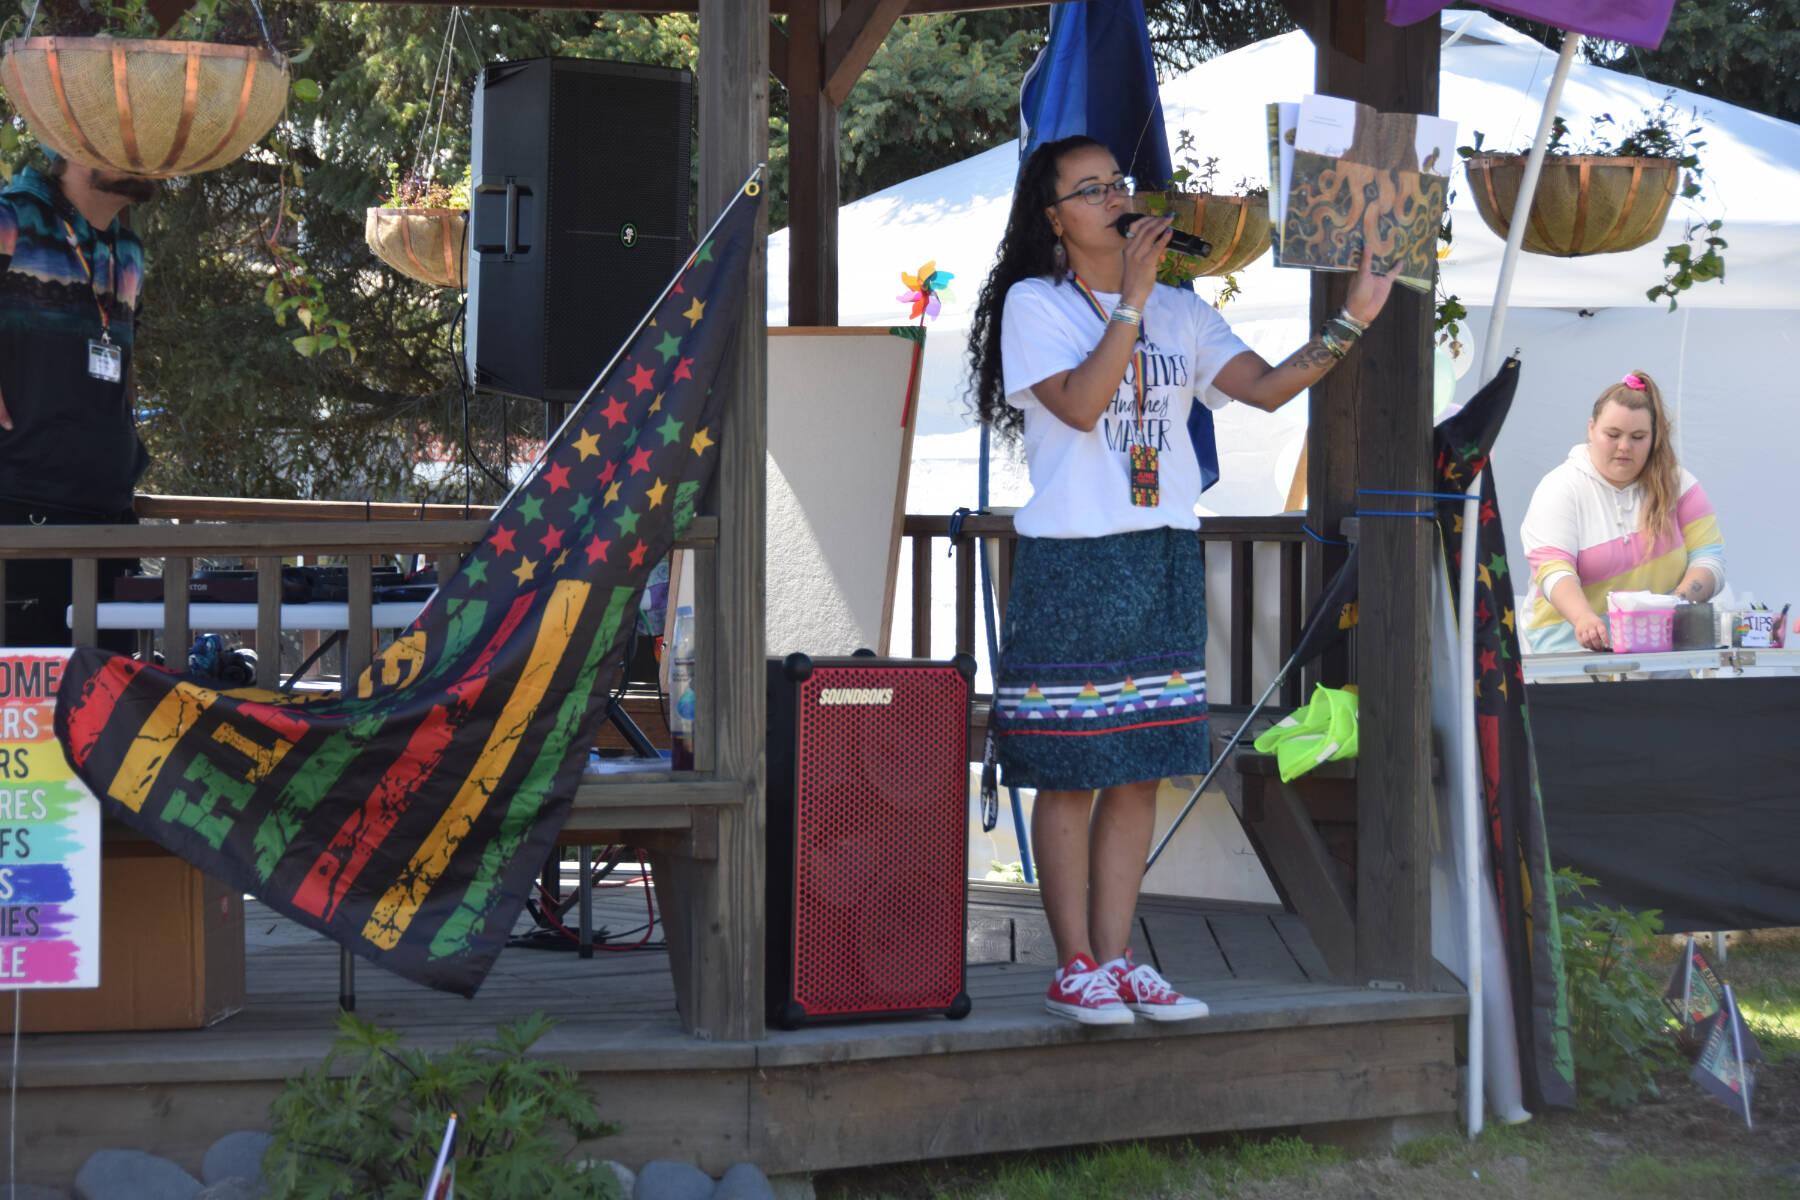 Educator Winter Marshall-Allen reads Maria Gianferrari’s “Be A Tree!” to the crowd gathered at WKFL Park for the Homer Pride Liberation Celebration on Saturday, June 17, 2023 in Homer, Alaska. (Delcenia Cosman/Homer News)